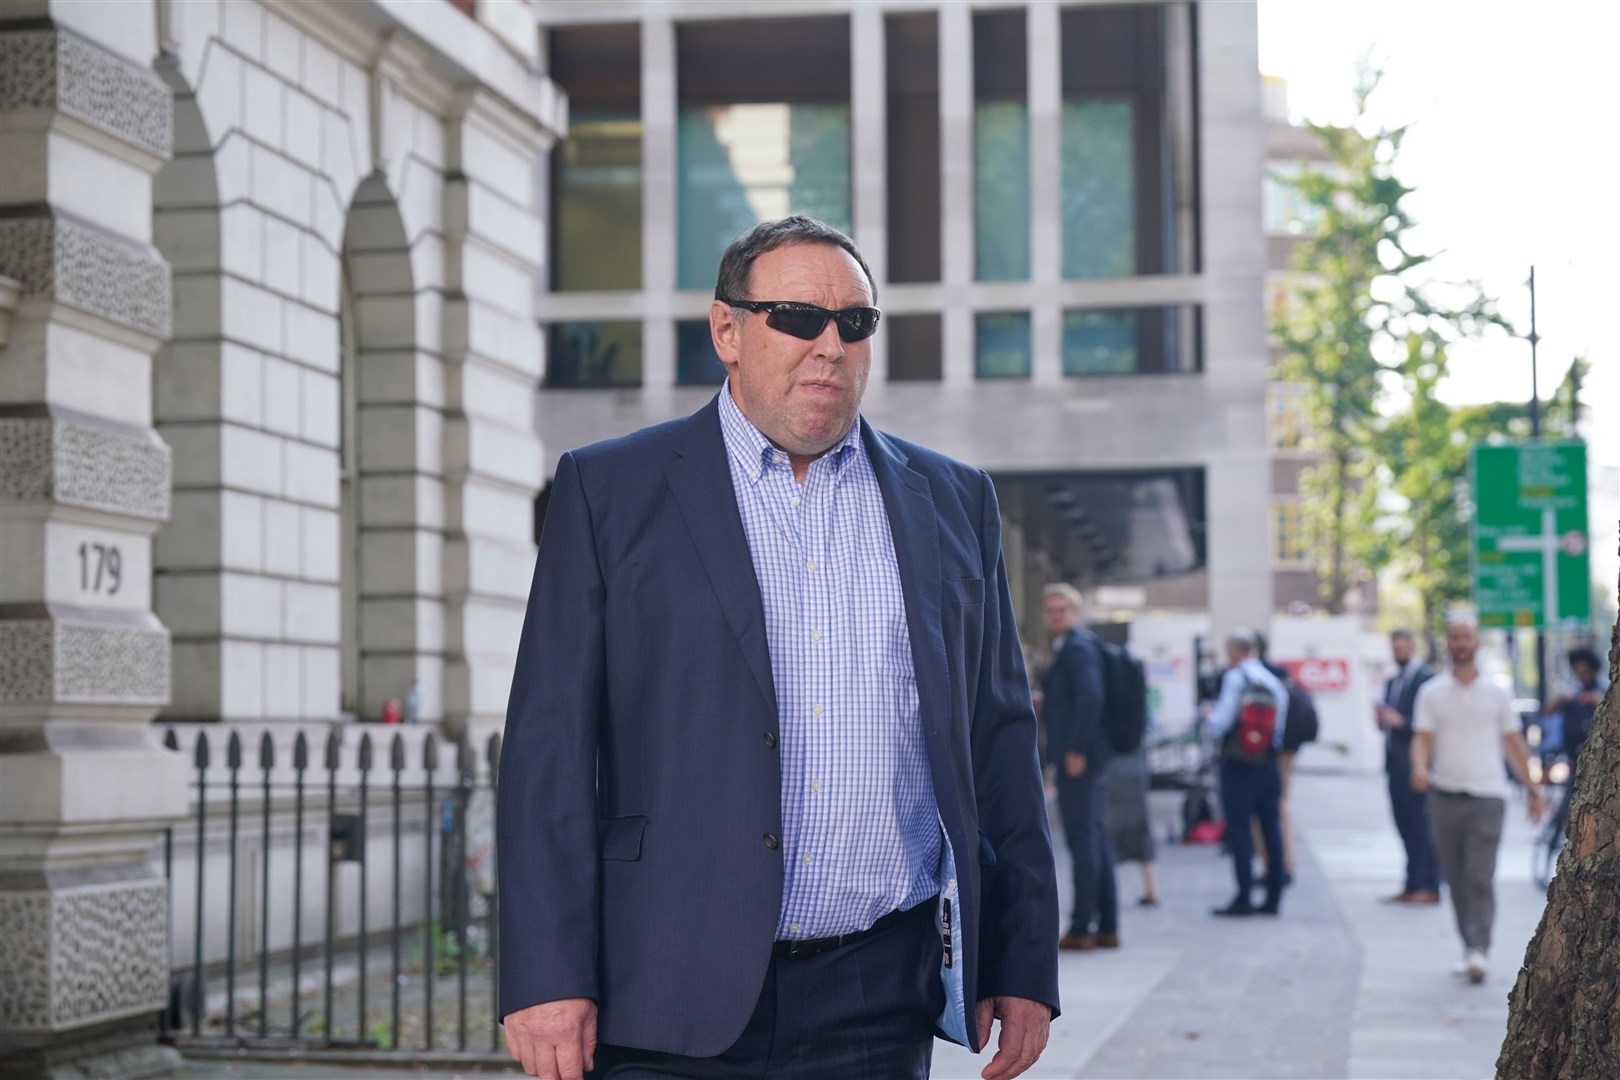 Robert Lewis leaving Westminster Magistrates’ Court in central London (Lucy North/PA)